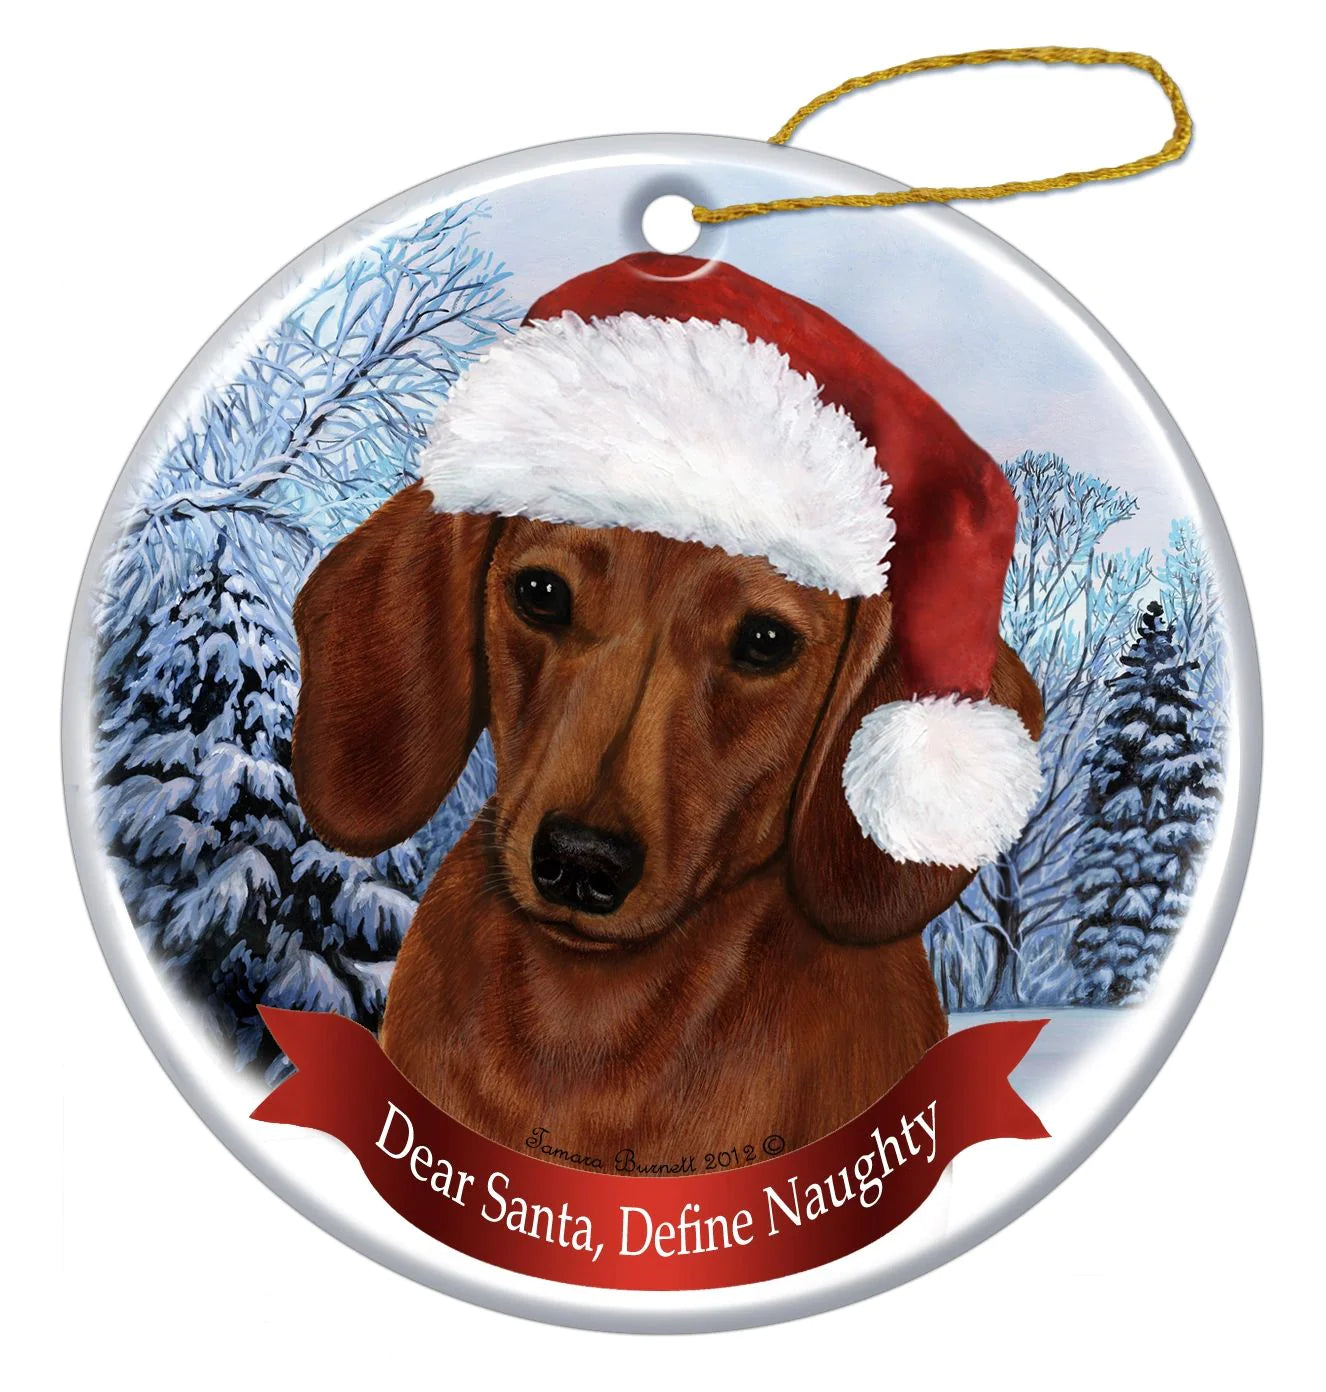 Holiday Ornaments - Get the Set